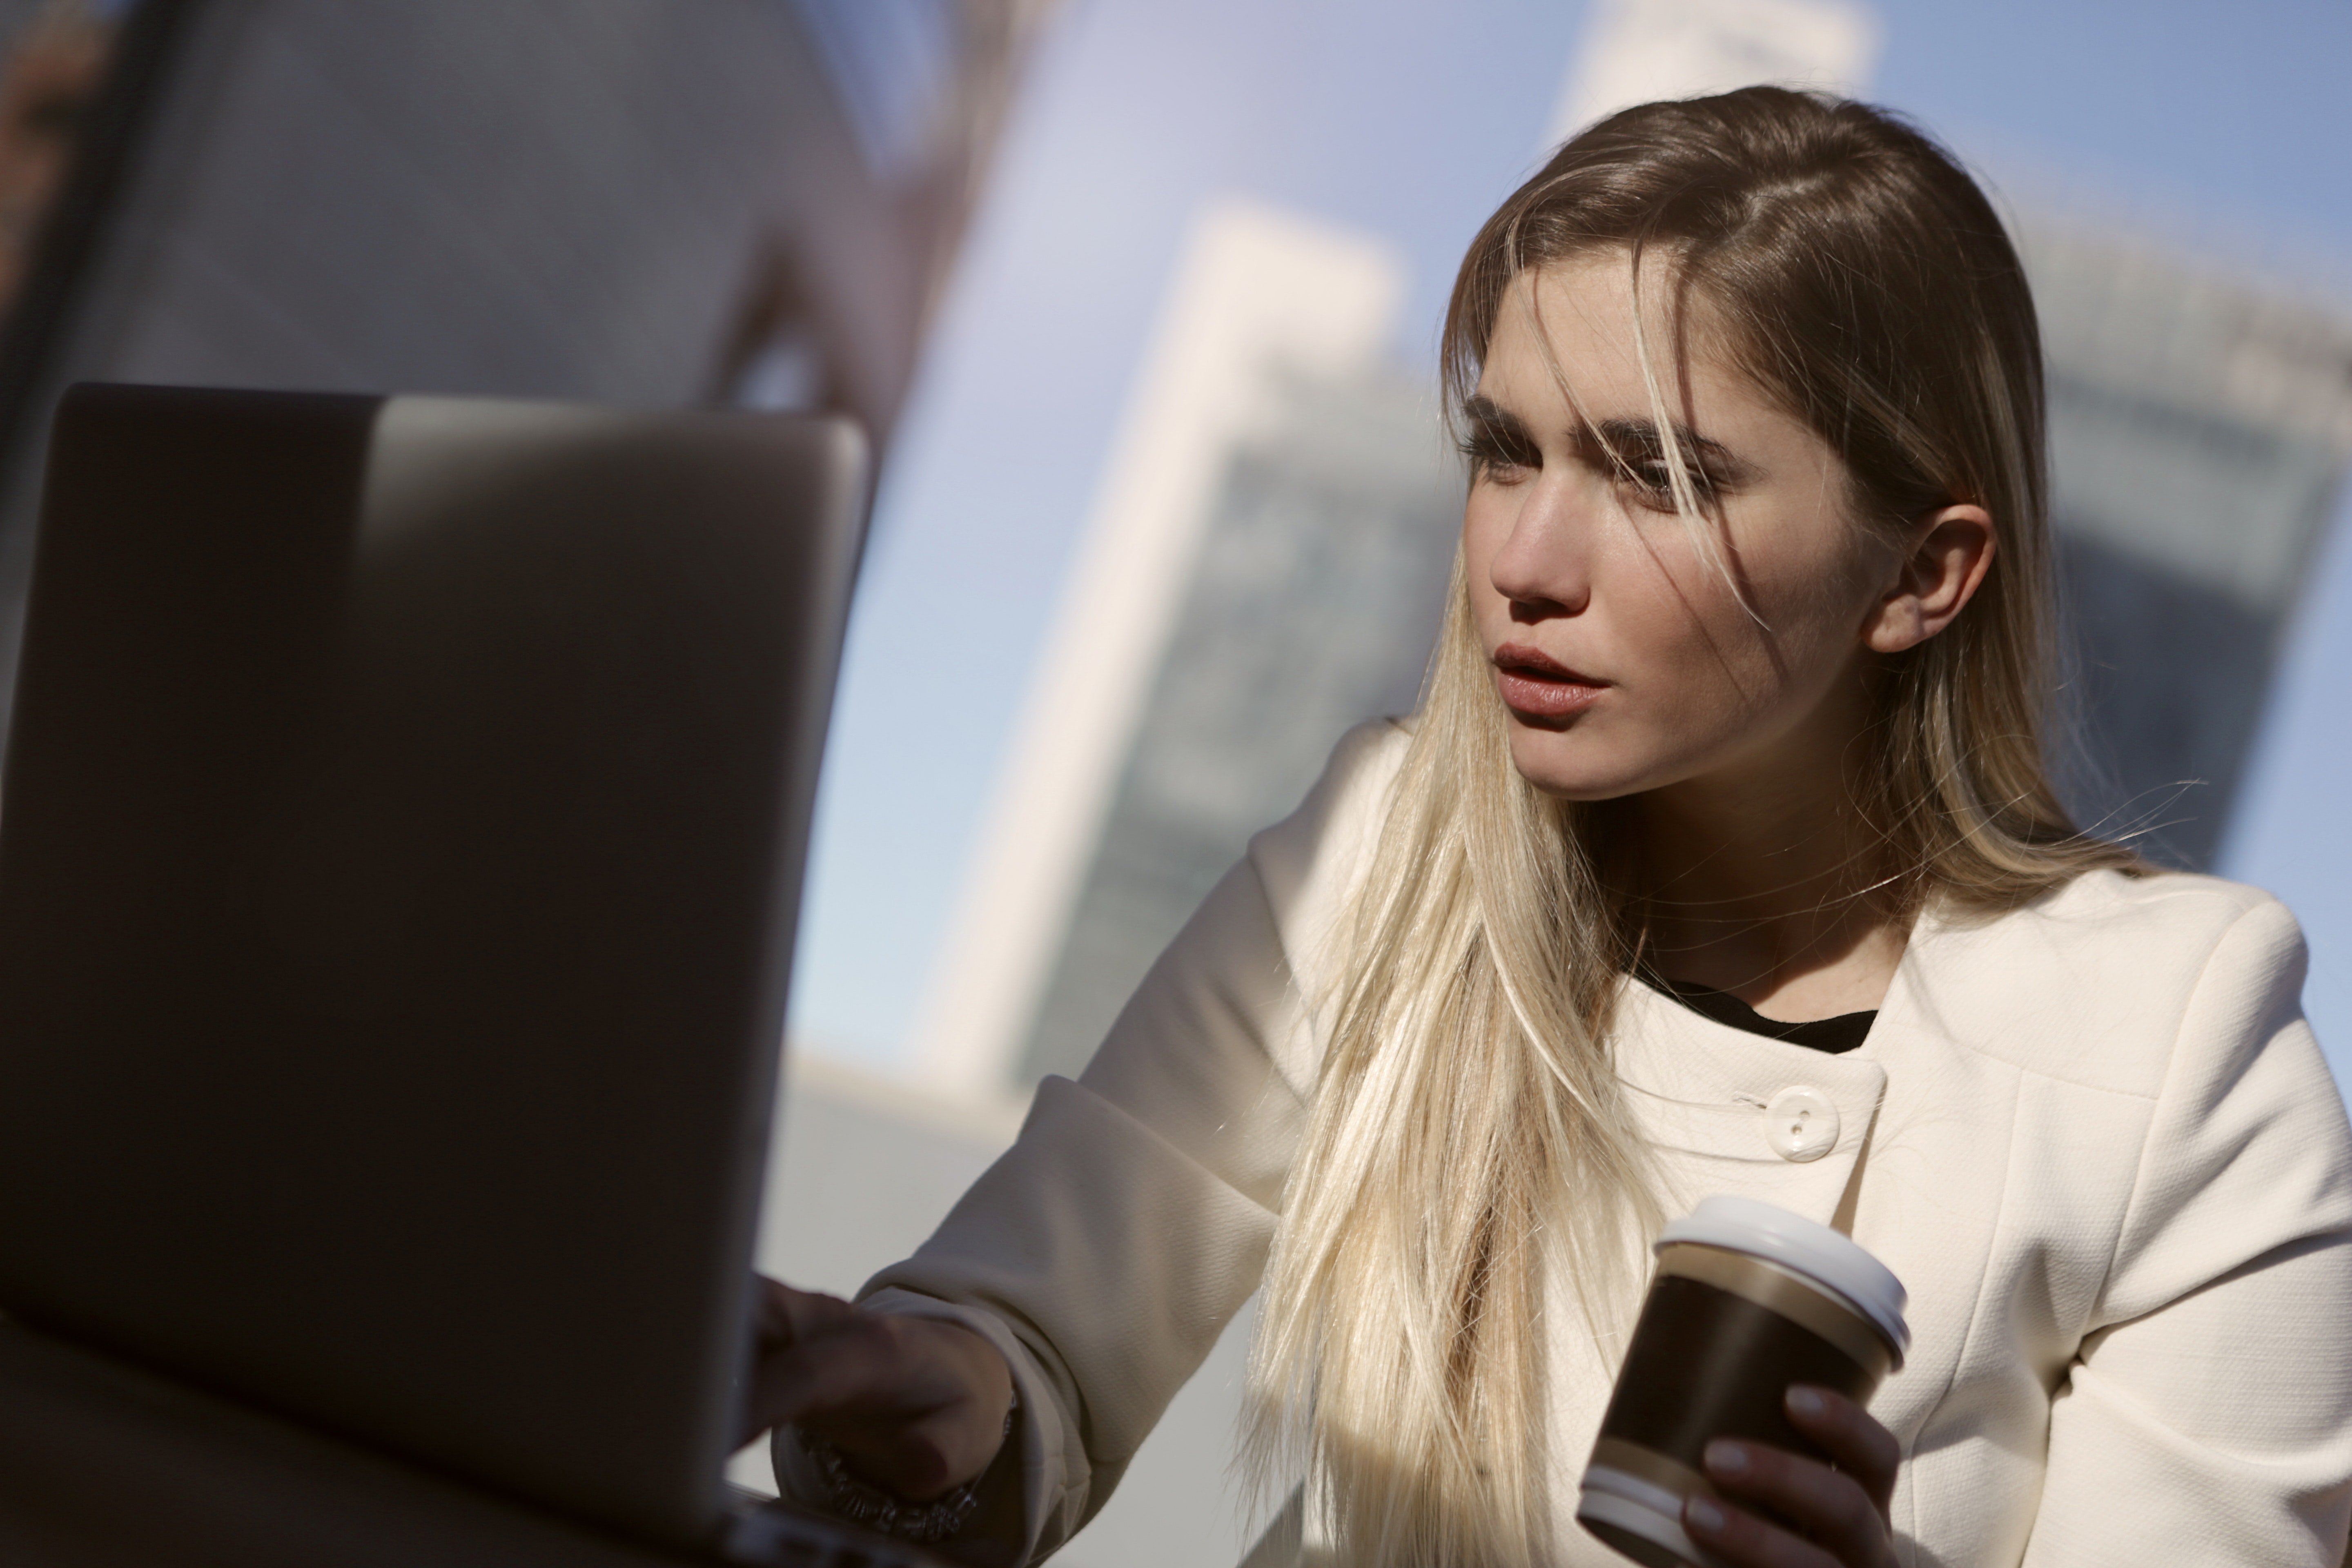 A light skinned blonde woman with long hair sits as a computer looking concerned while holding a disposable coffee cup